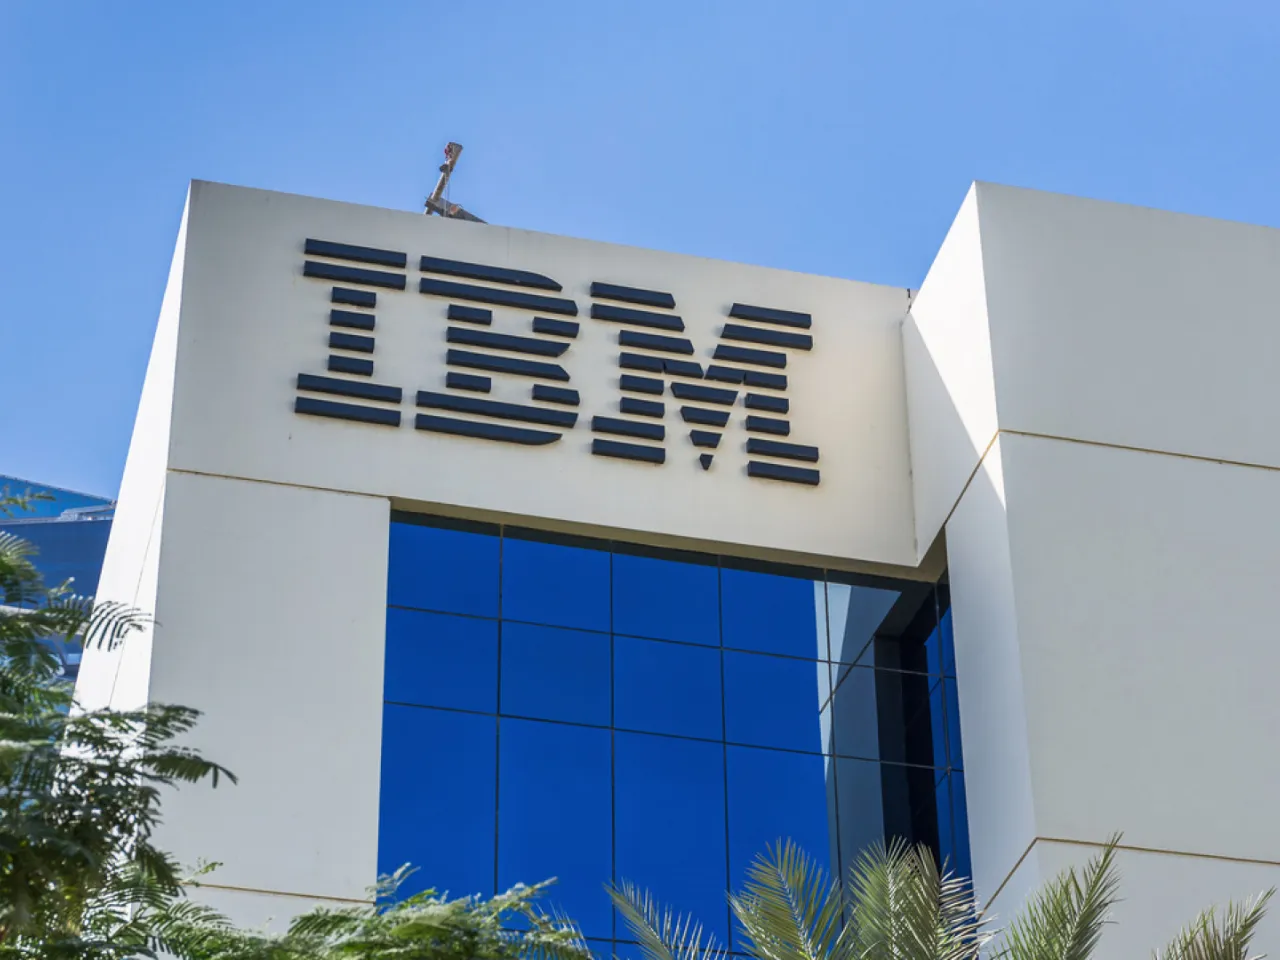 IBM expands partnership with Parle Products